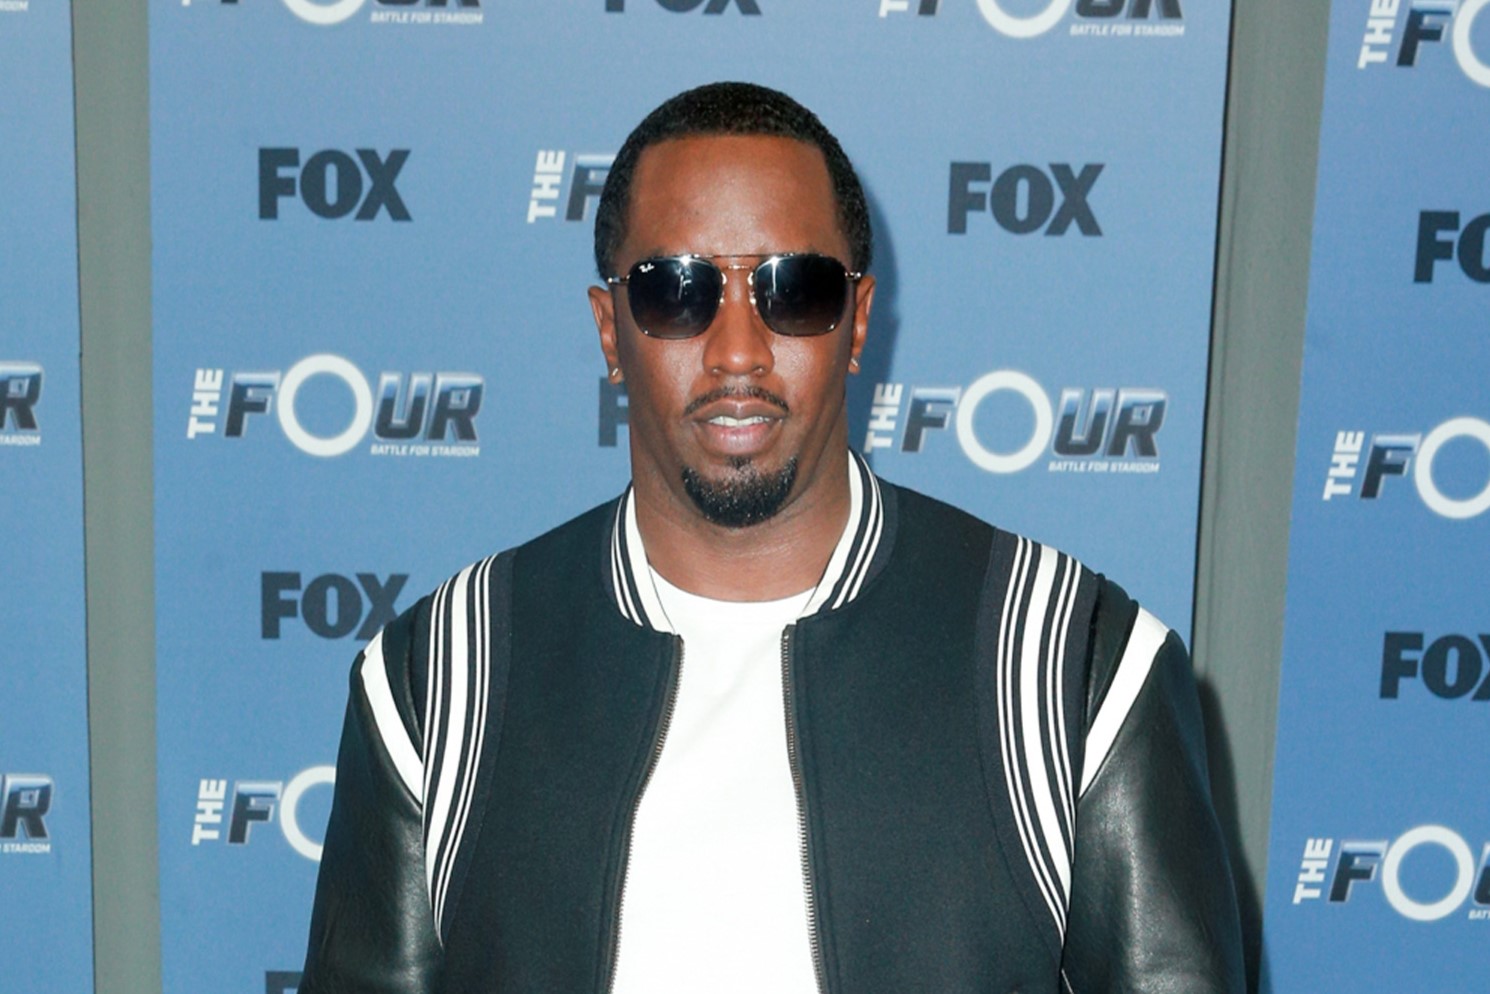 Sean Diddy Combs Sued Again: Victim Allegedly Forced to Endure Sexual Abuse So Her Ex-Boyfriend Could Get a Modeling Gig: Report